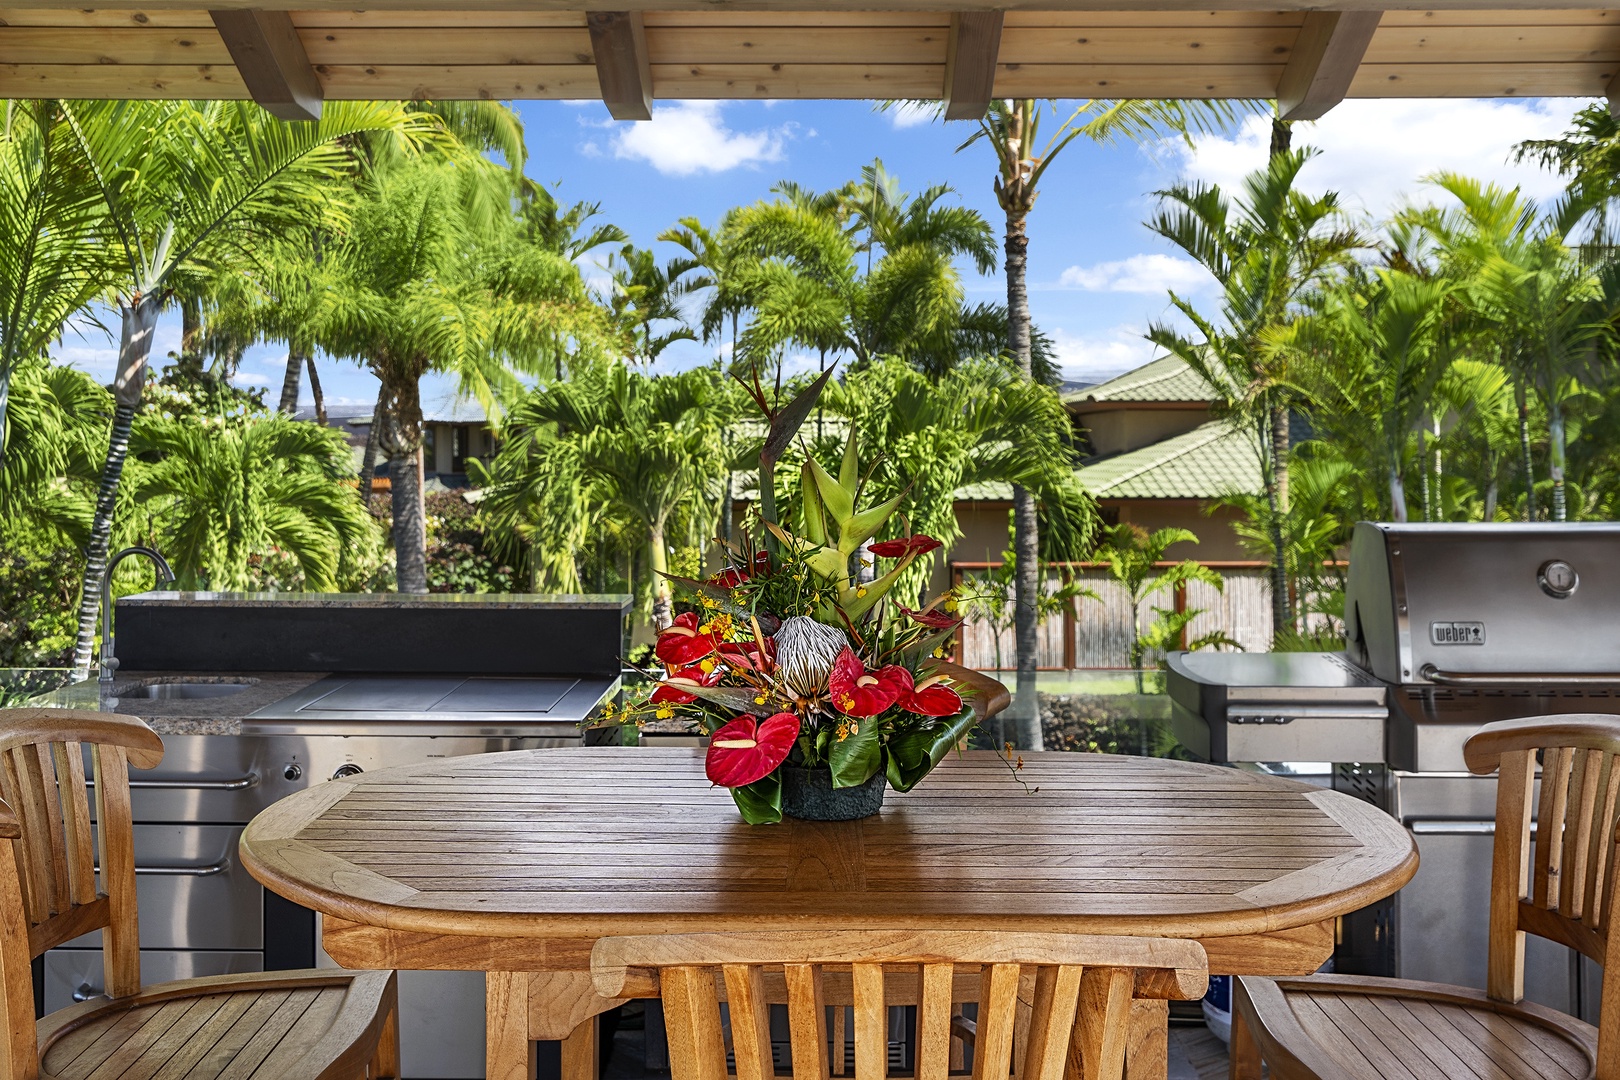 Kamuela Vacation Rentals, Champion Ridge #35 - Outside Dining Lanai in the pool overlook area